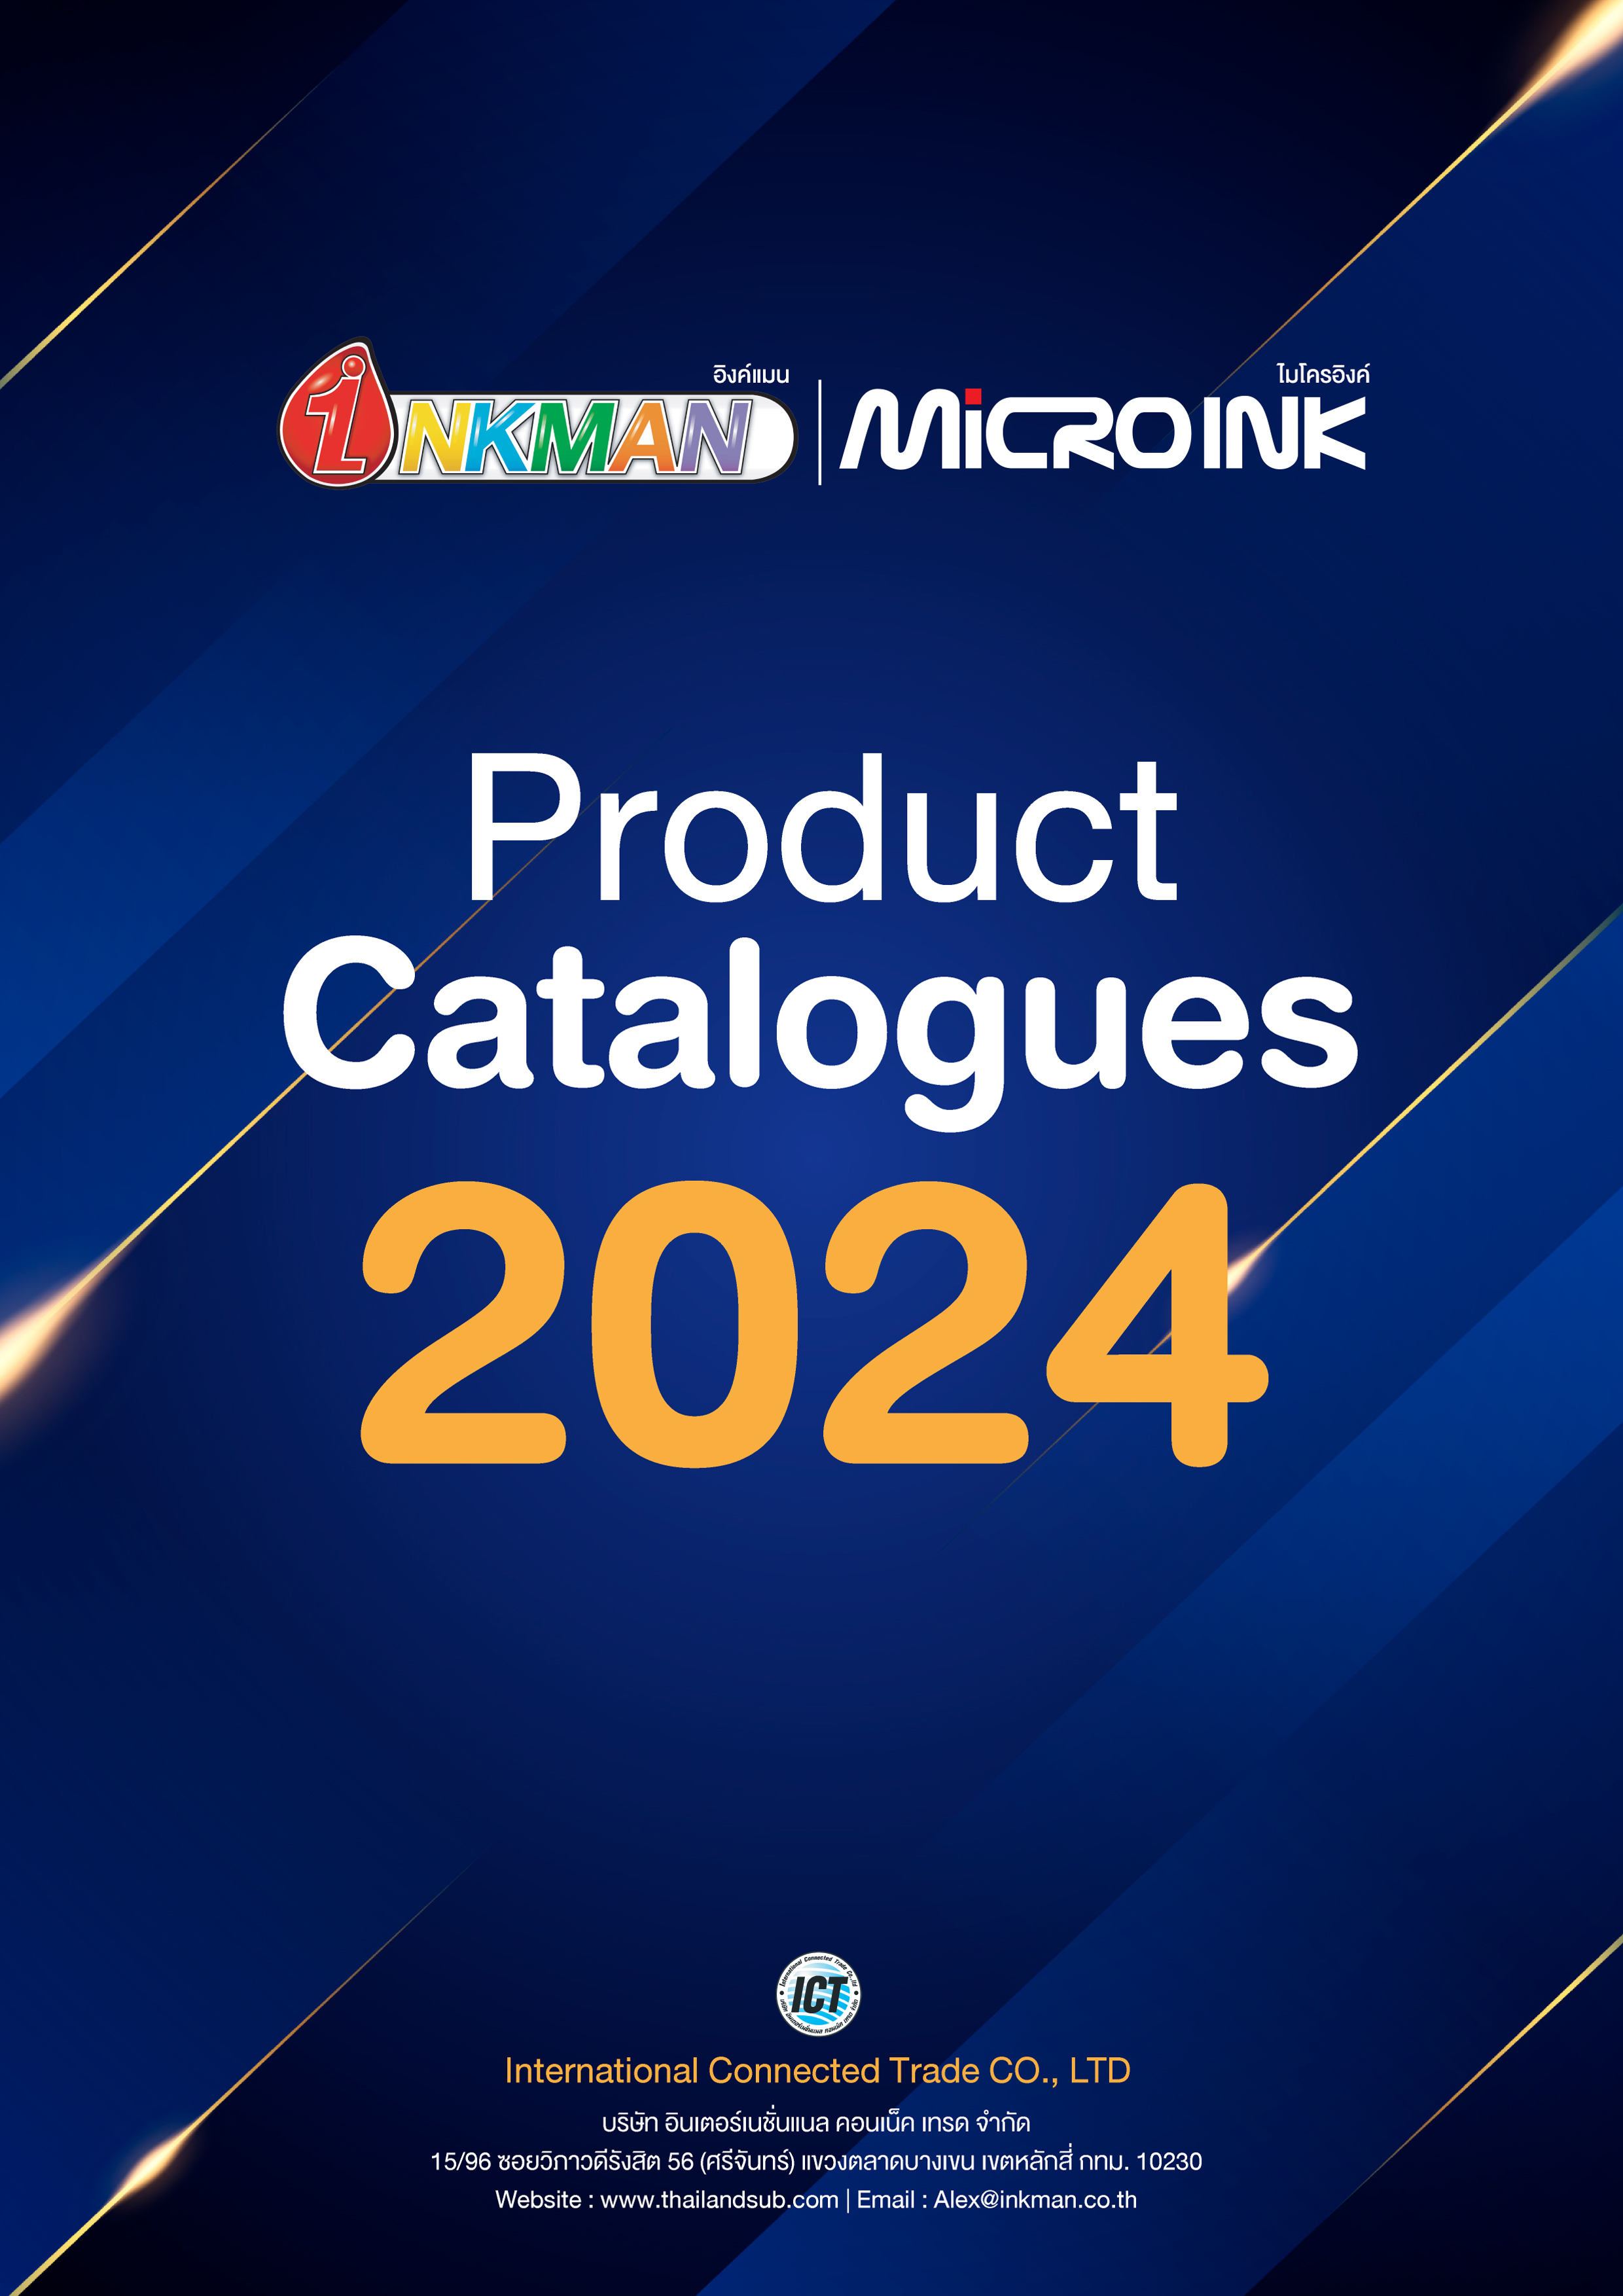 Inkman-Microink Product Catalogues 2024